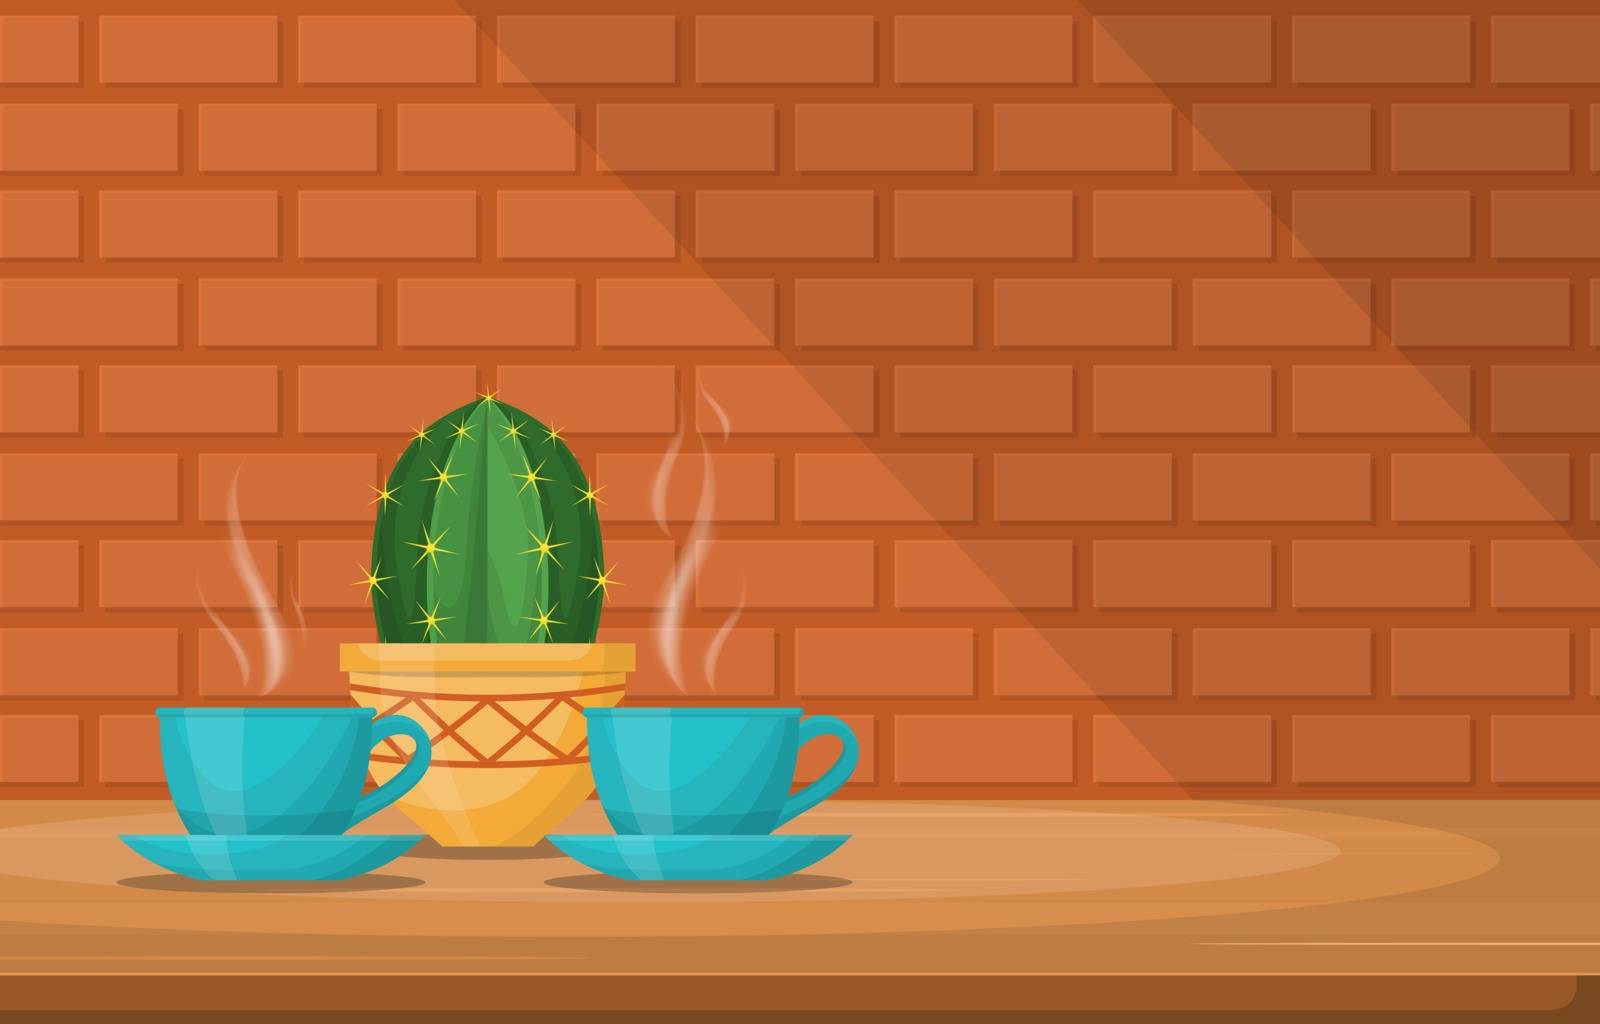 Cups of Hot Tea on Table with Cactus Plant Brick Wall Illustration